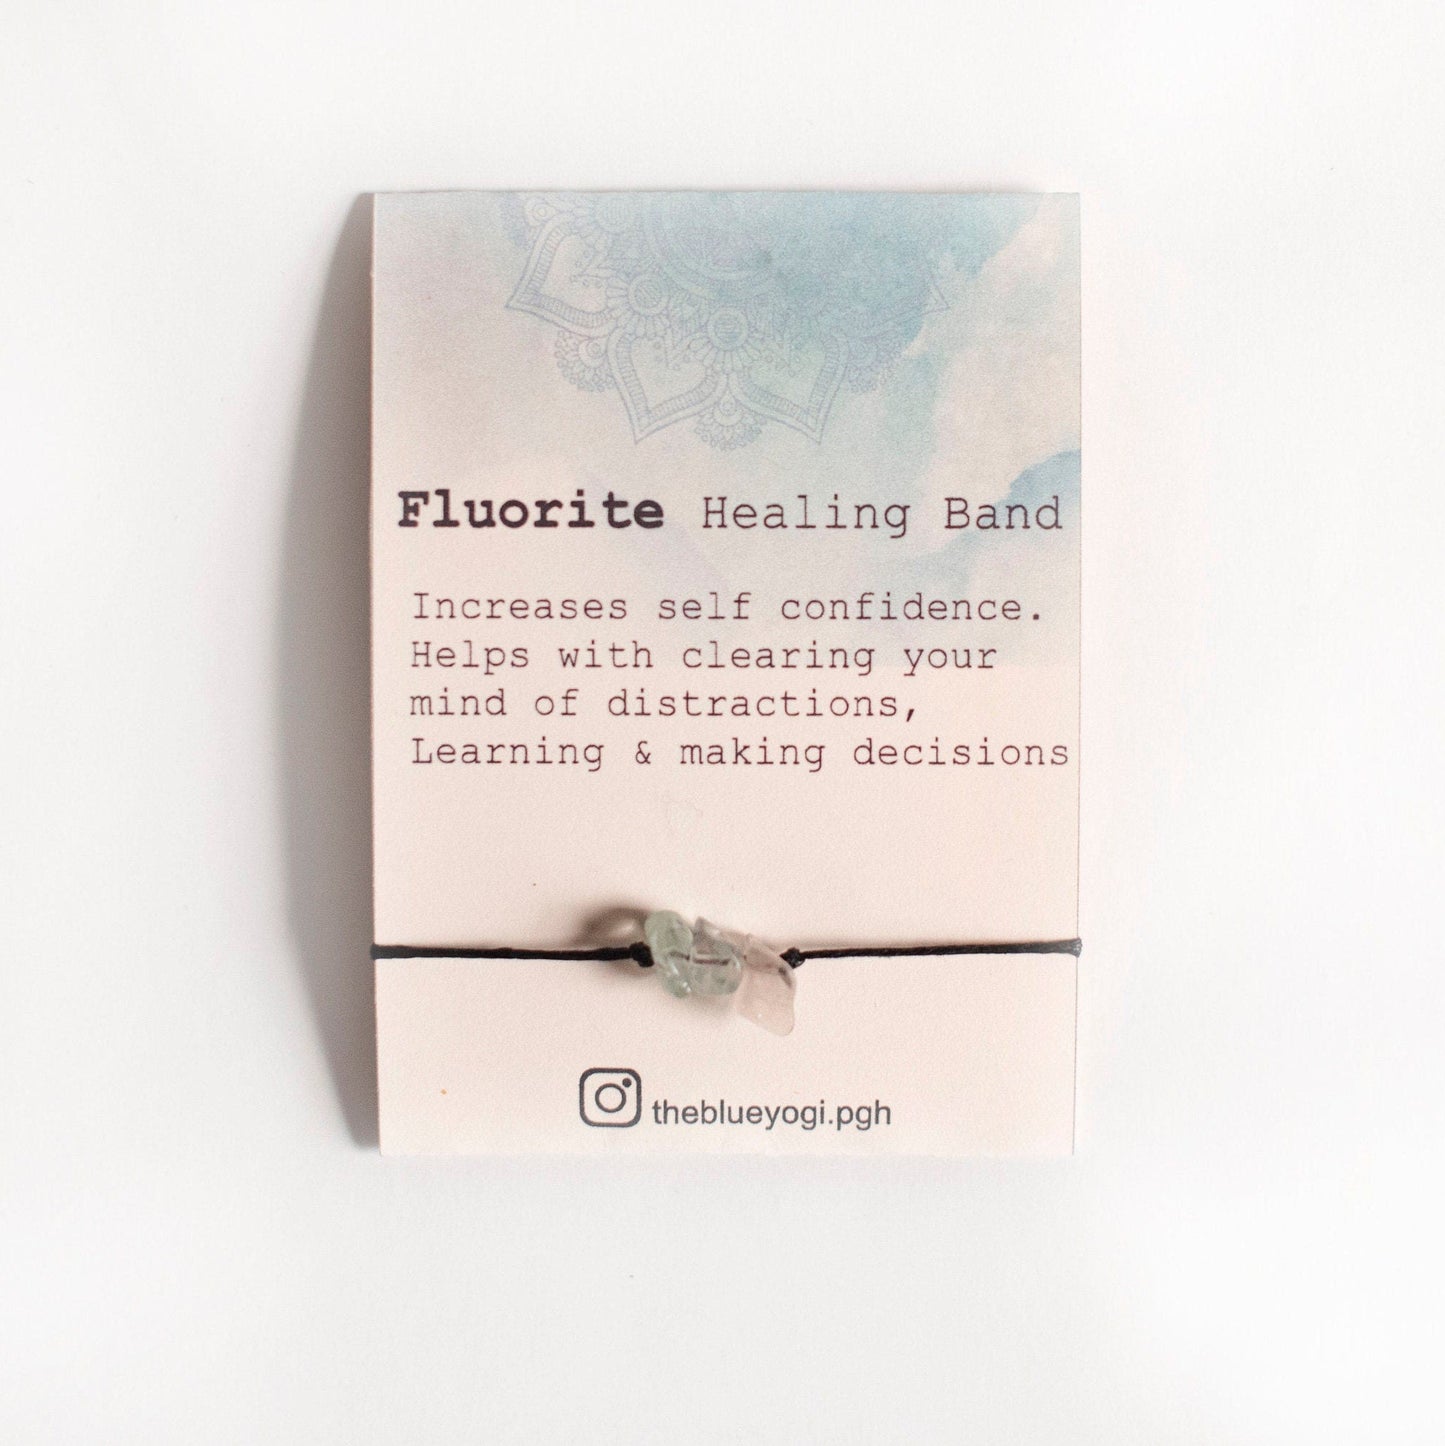 Fluorite Healing Band with an Affirmation